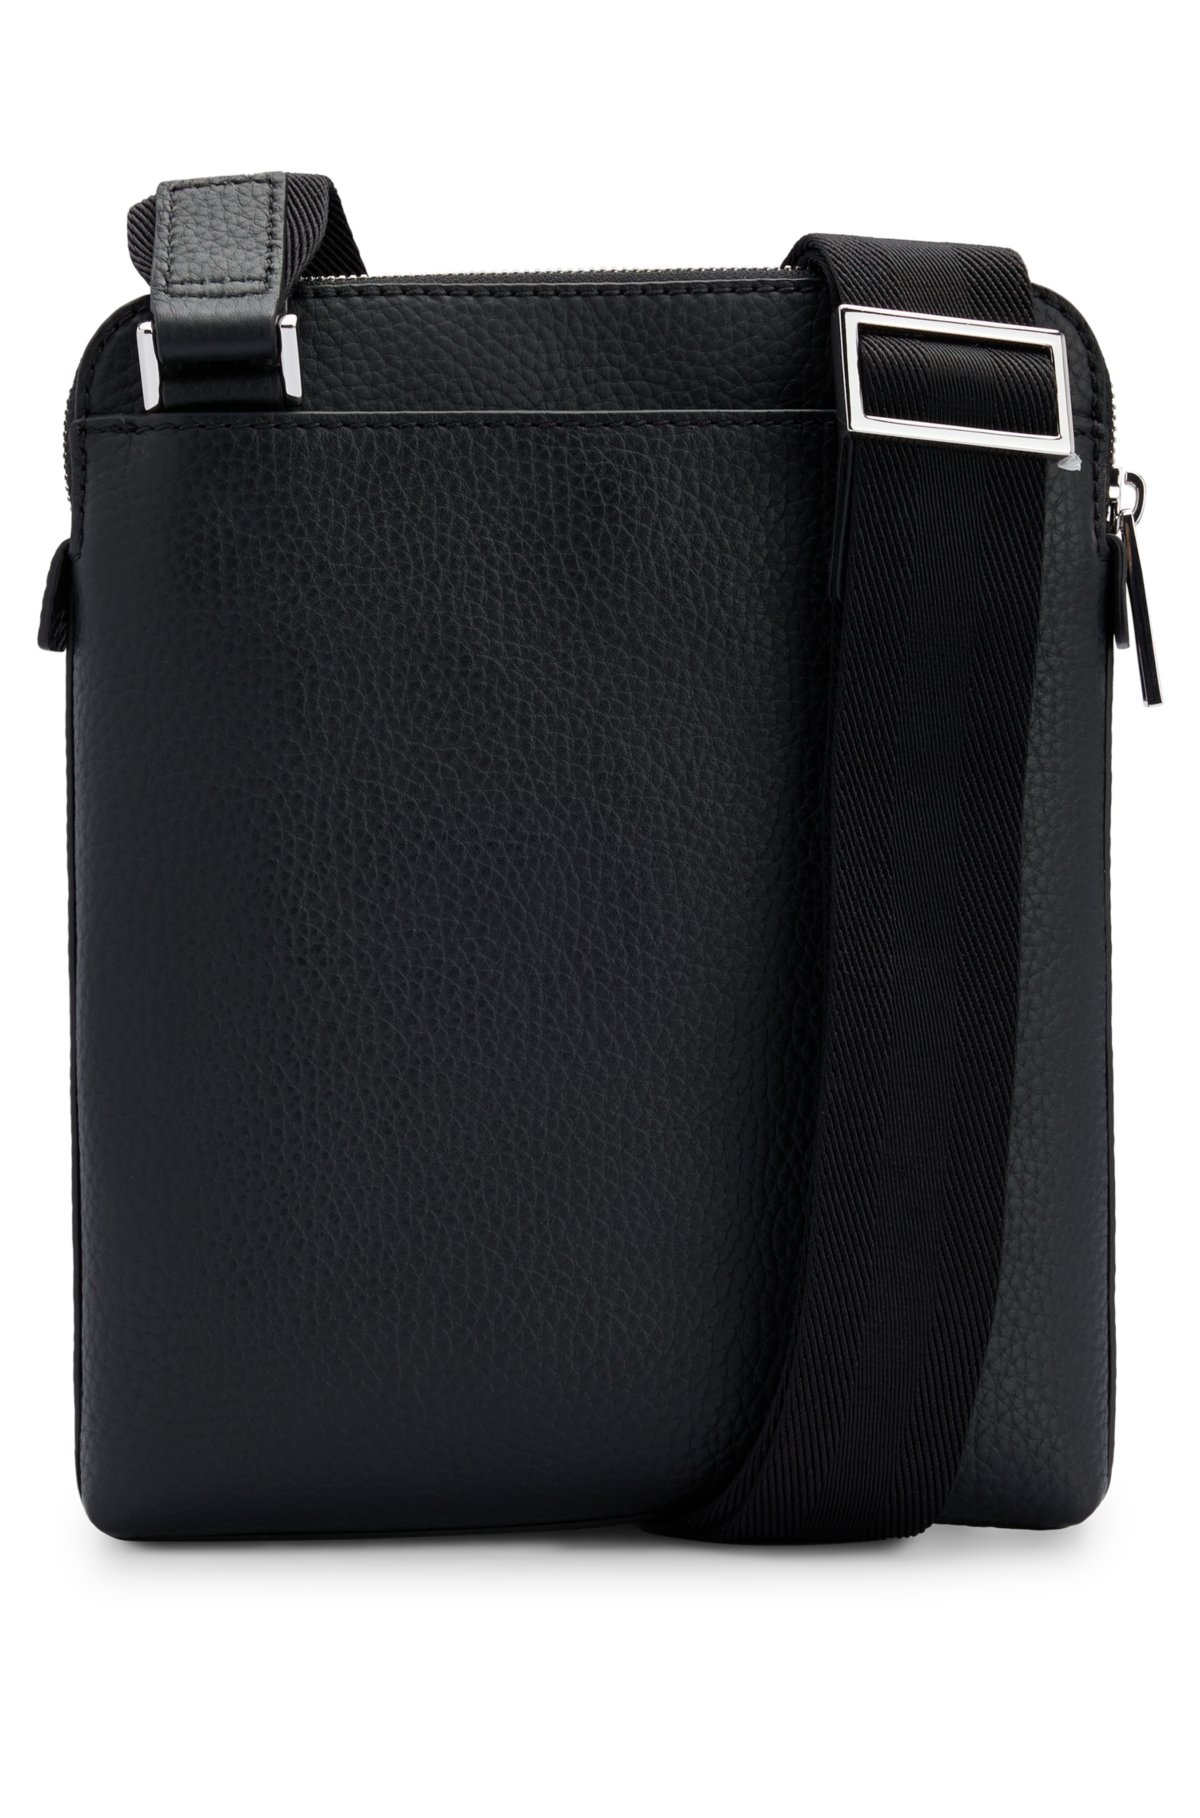 BOSS - Grained Italian-leather envelope bag with front zip pocket